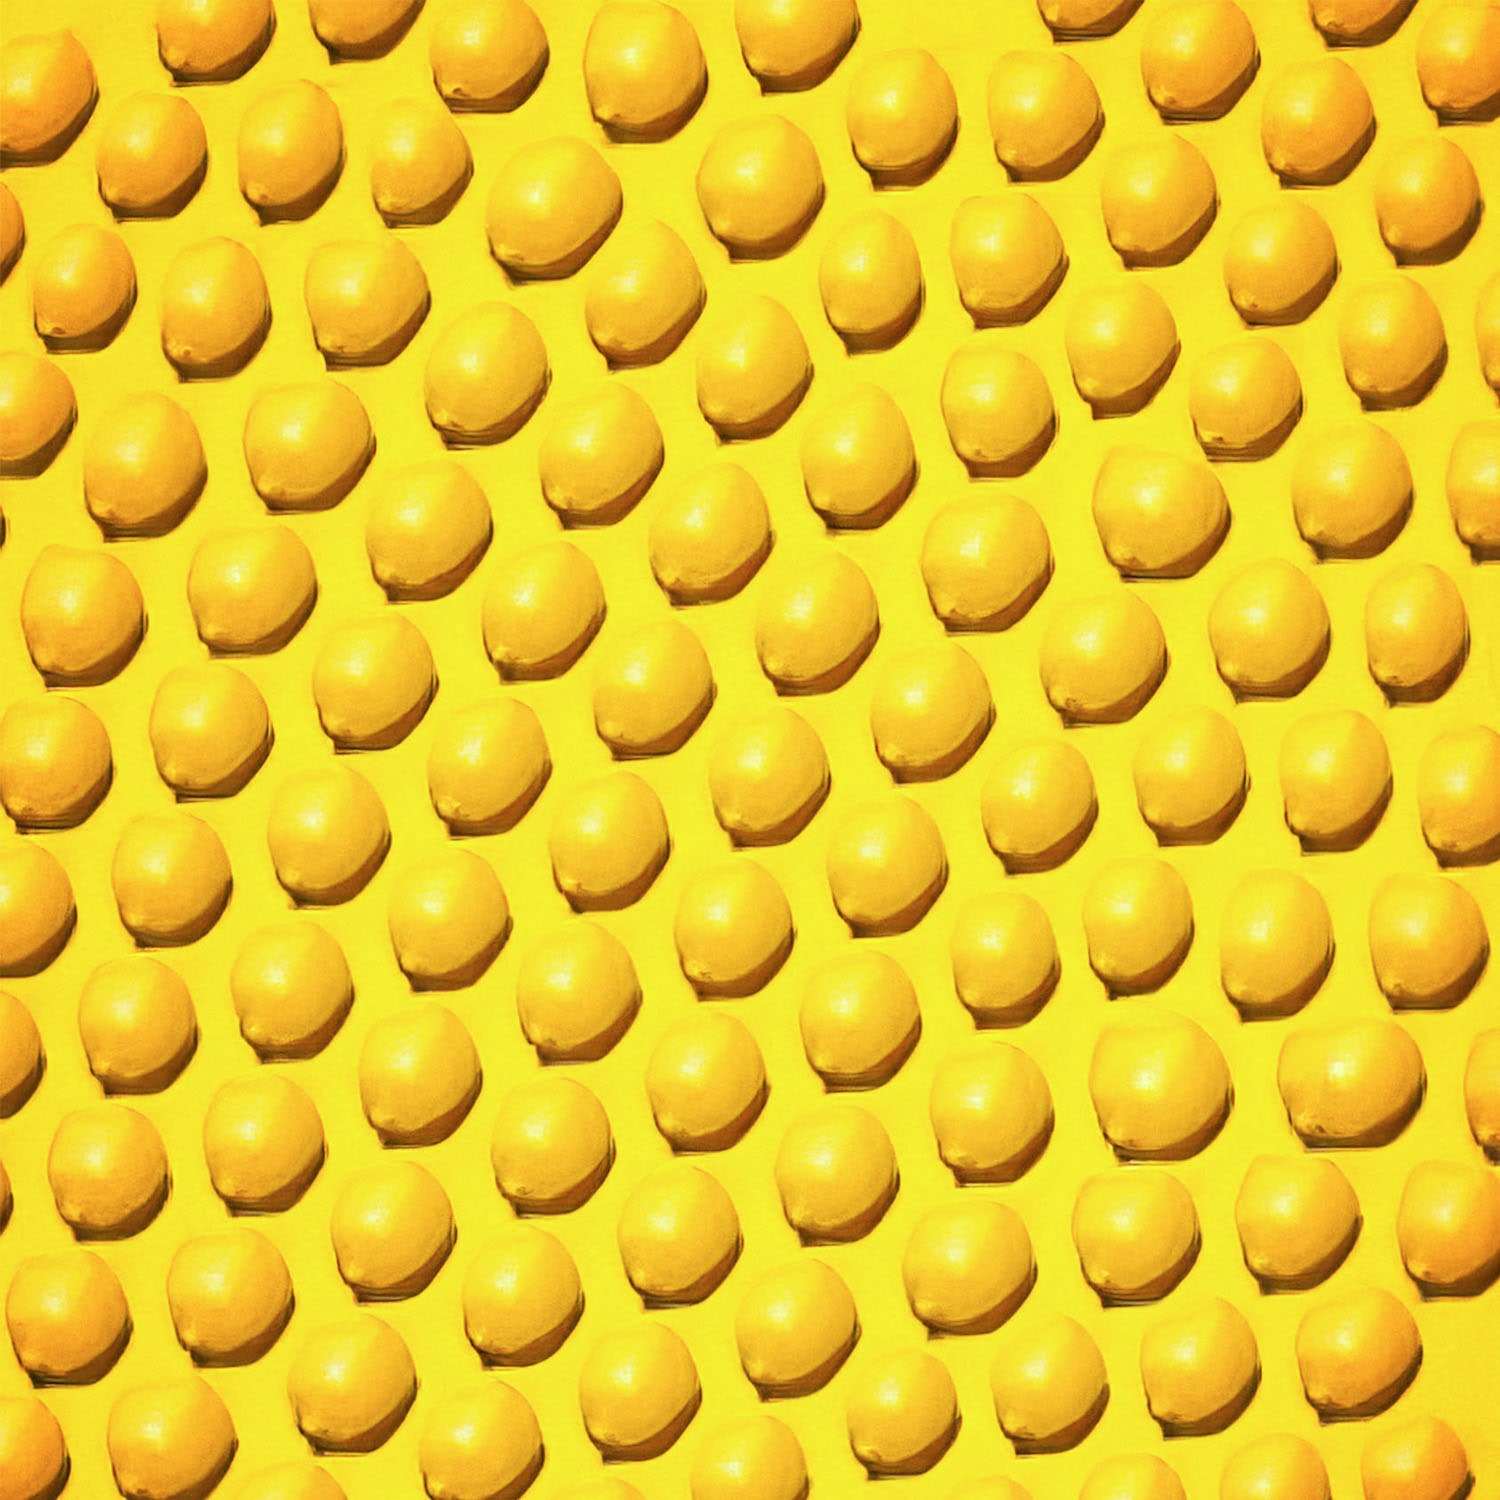 An illustrated pattern of yellow lemons on a solid yellow background.